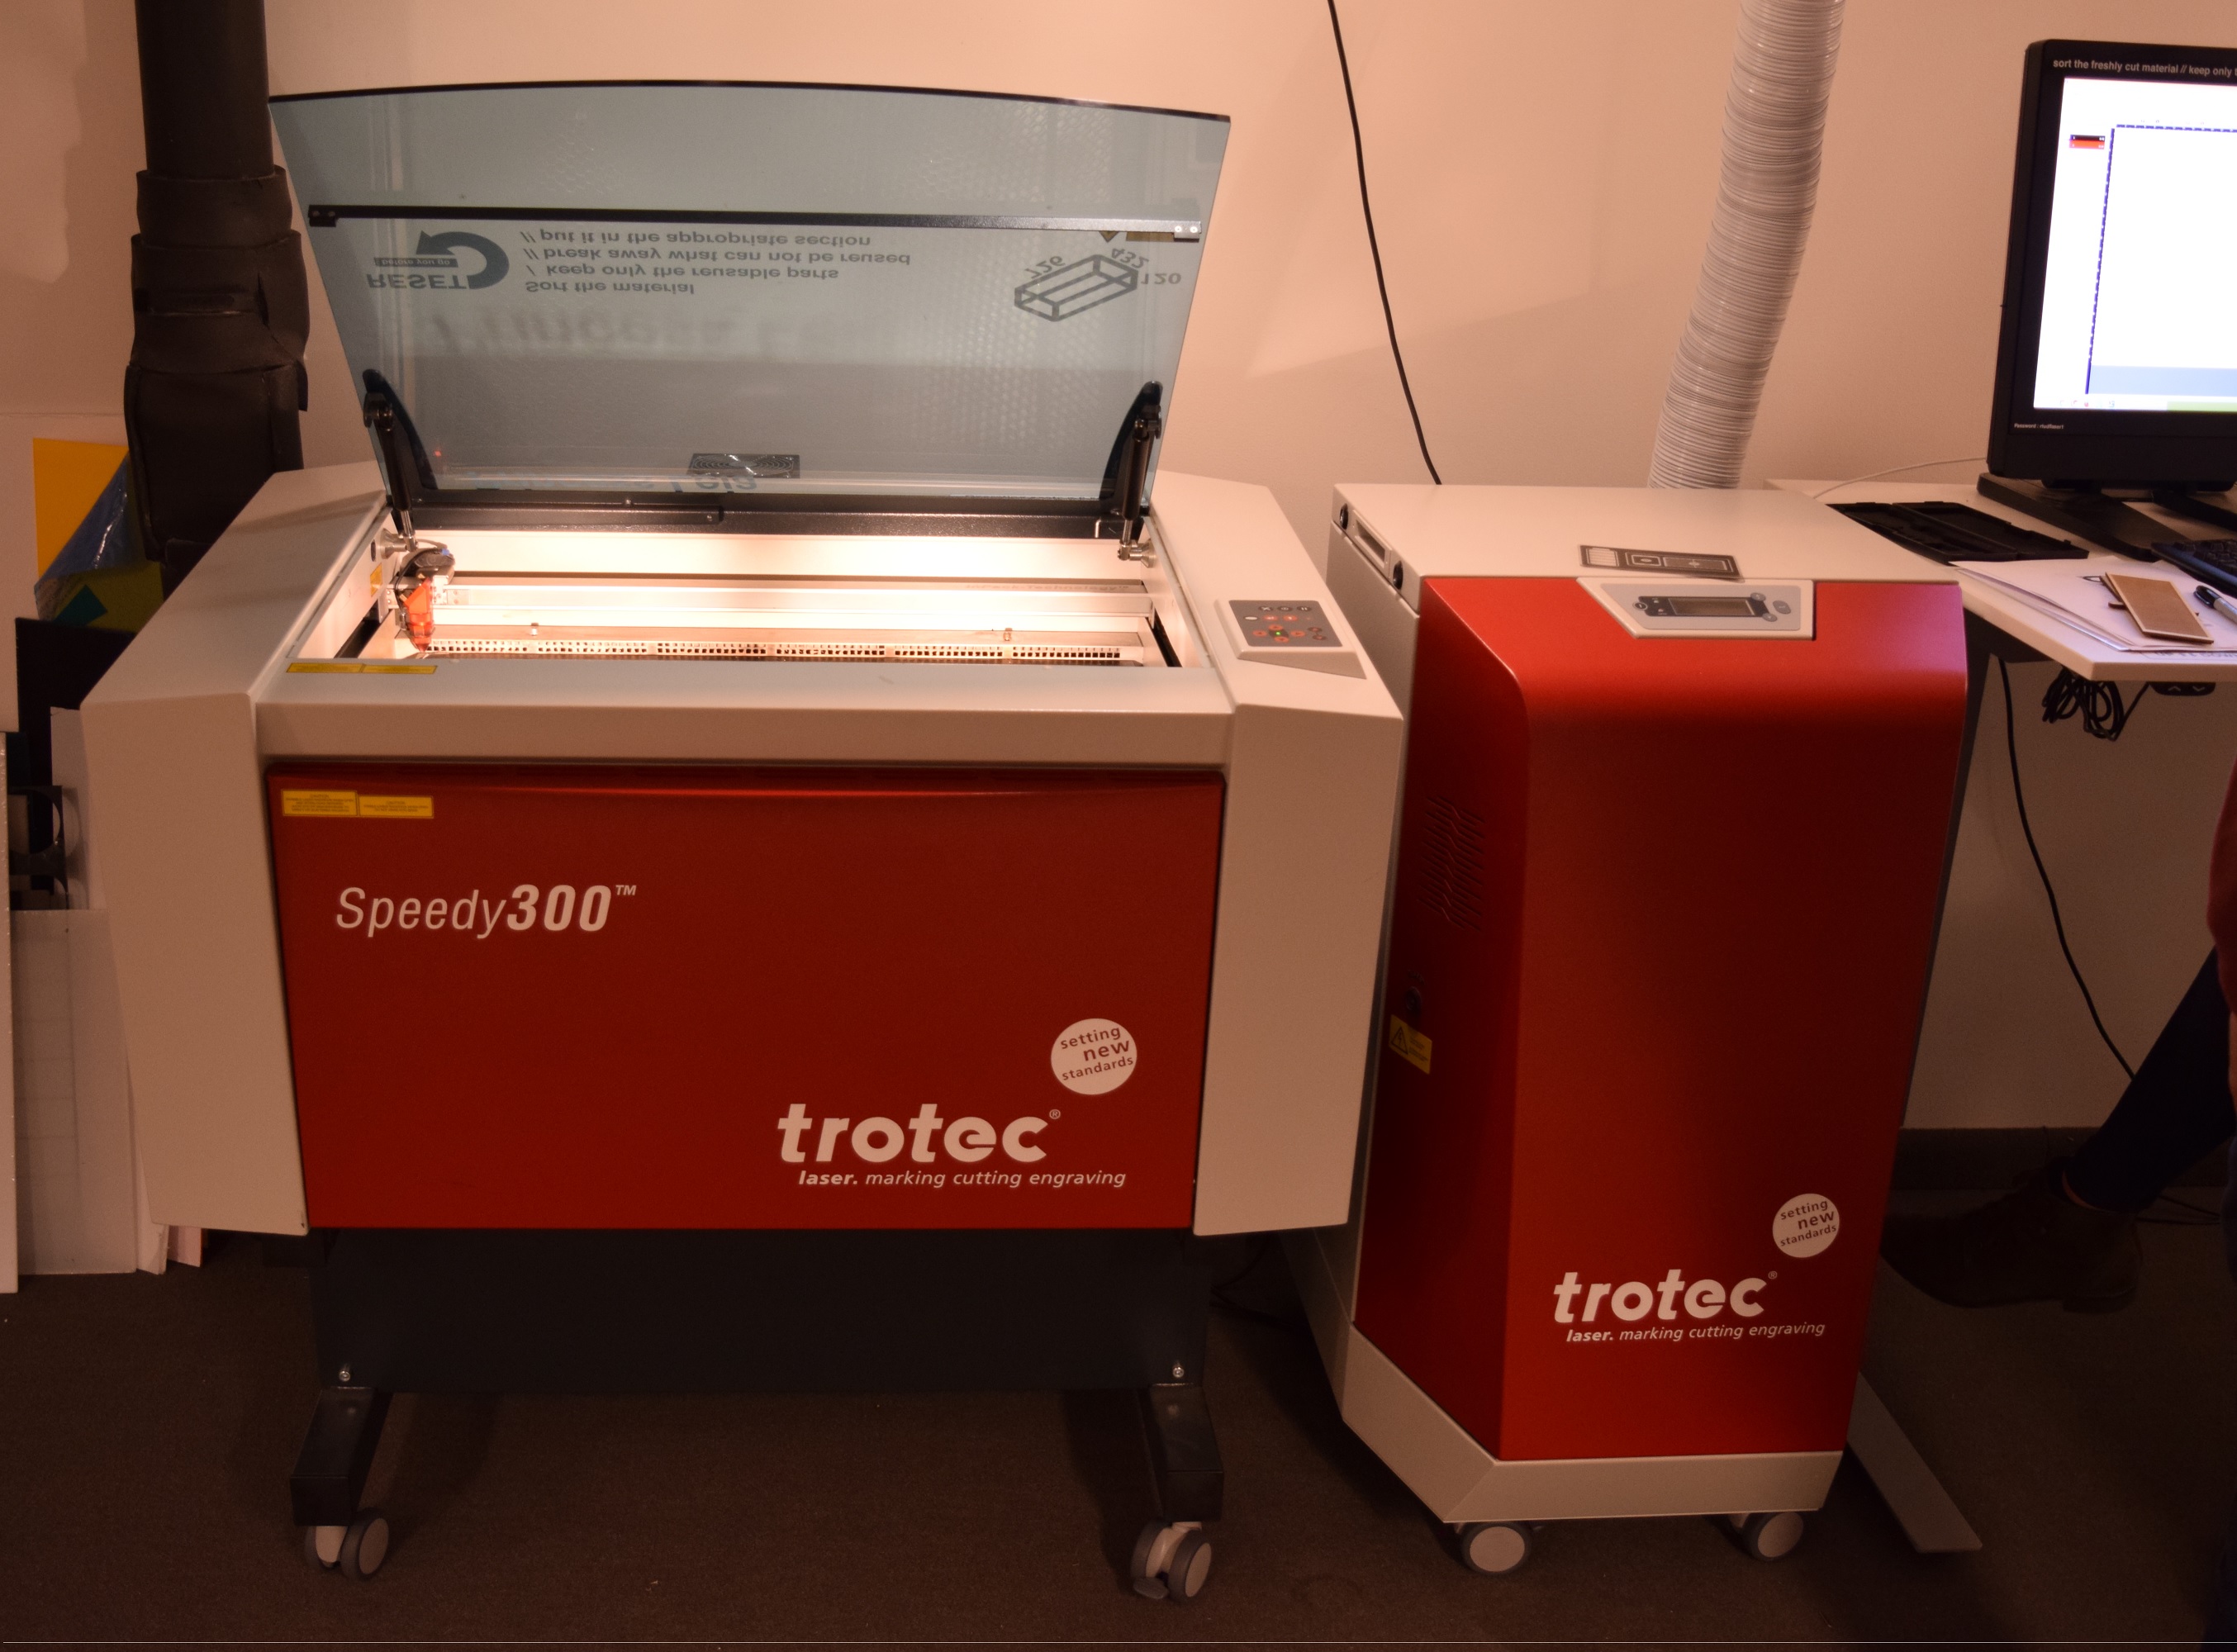 Trotec Speedy300 Laser Cutting and Engraving machine | UseScience